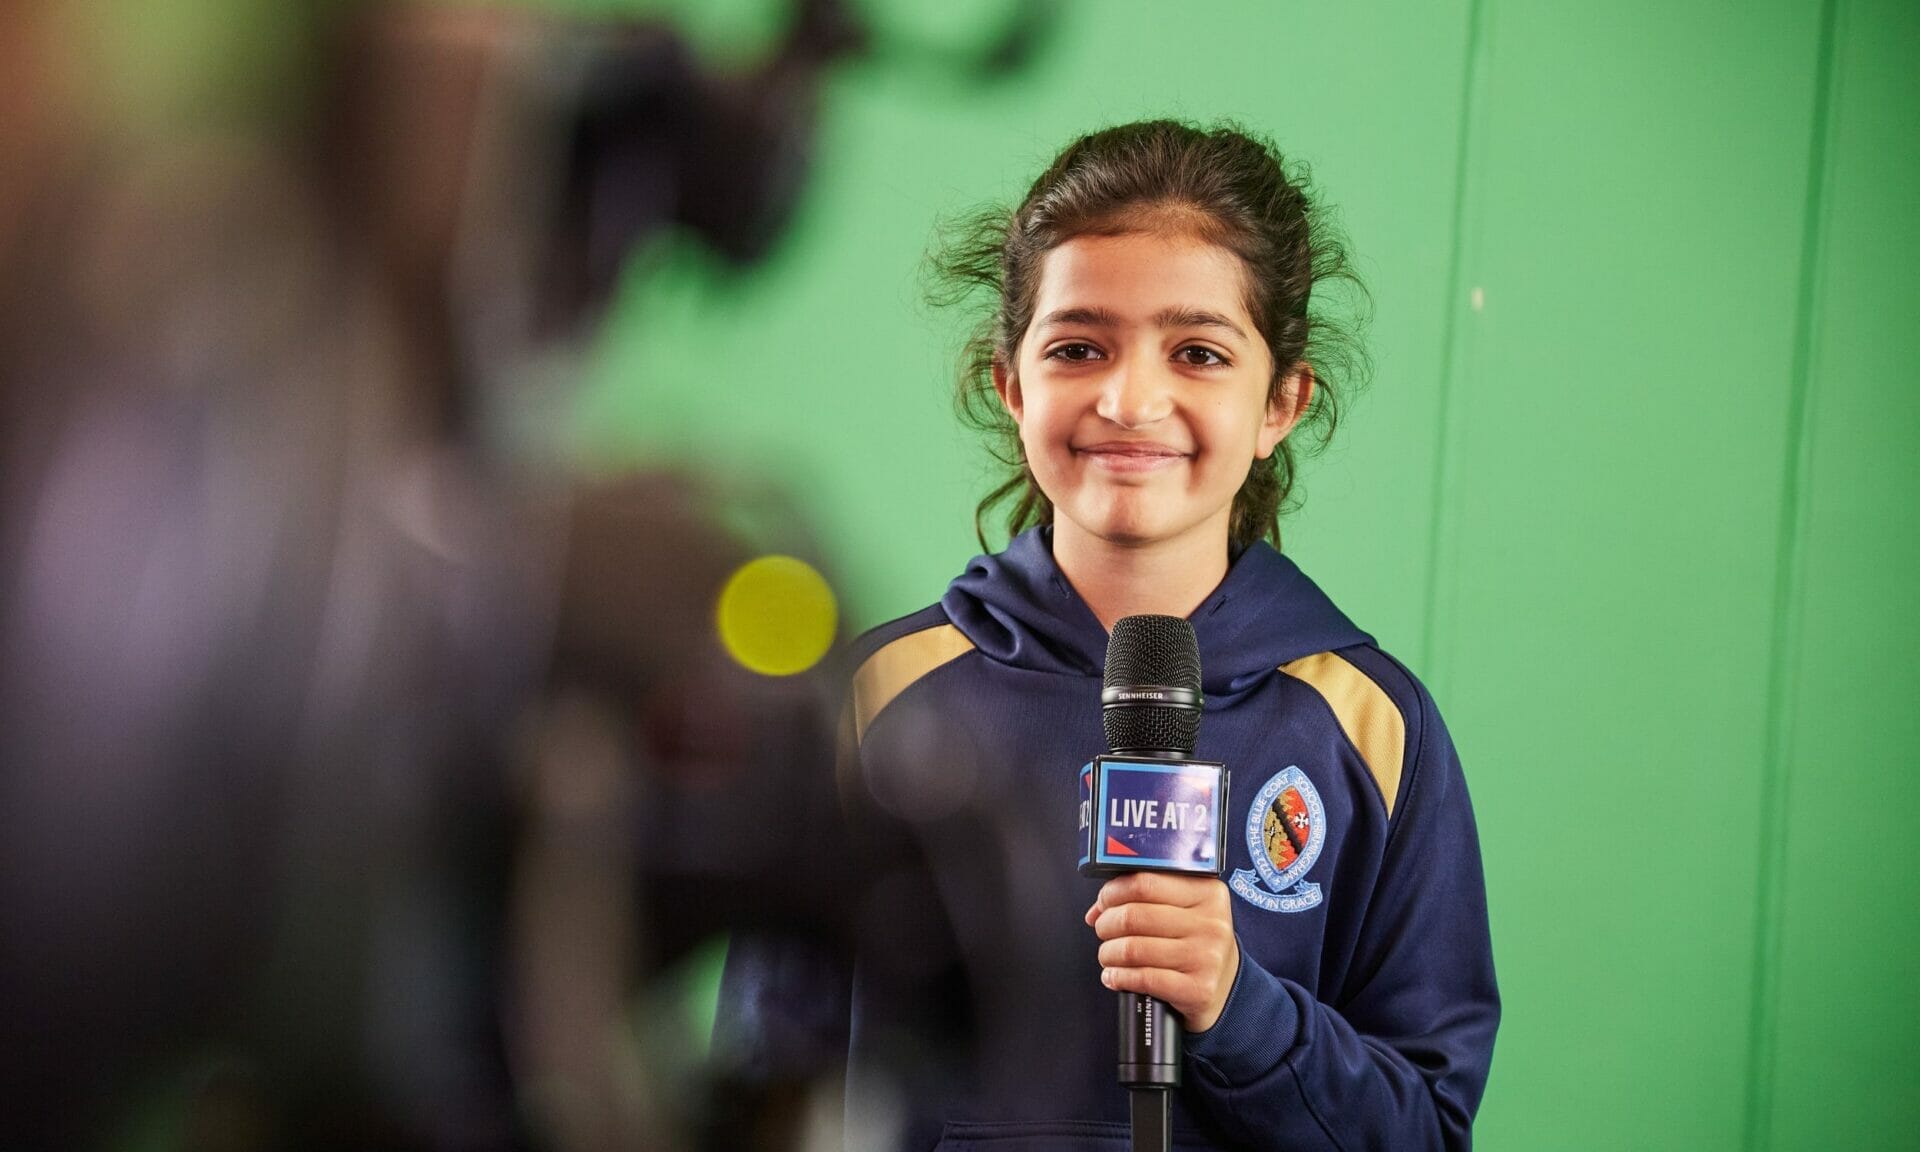 A girl holds a microphone up in front of a green screen during a Computing lesson where they are learning how to broadcast.